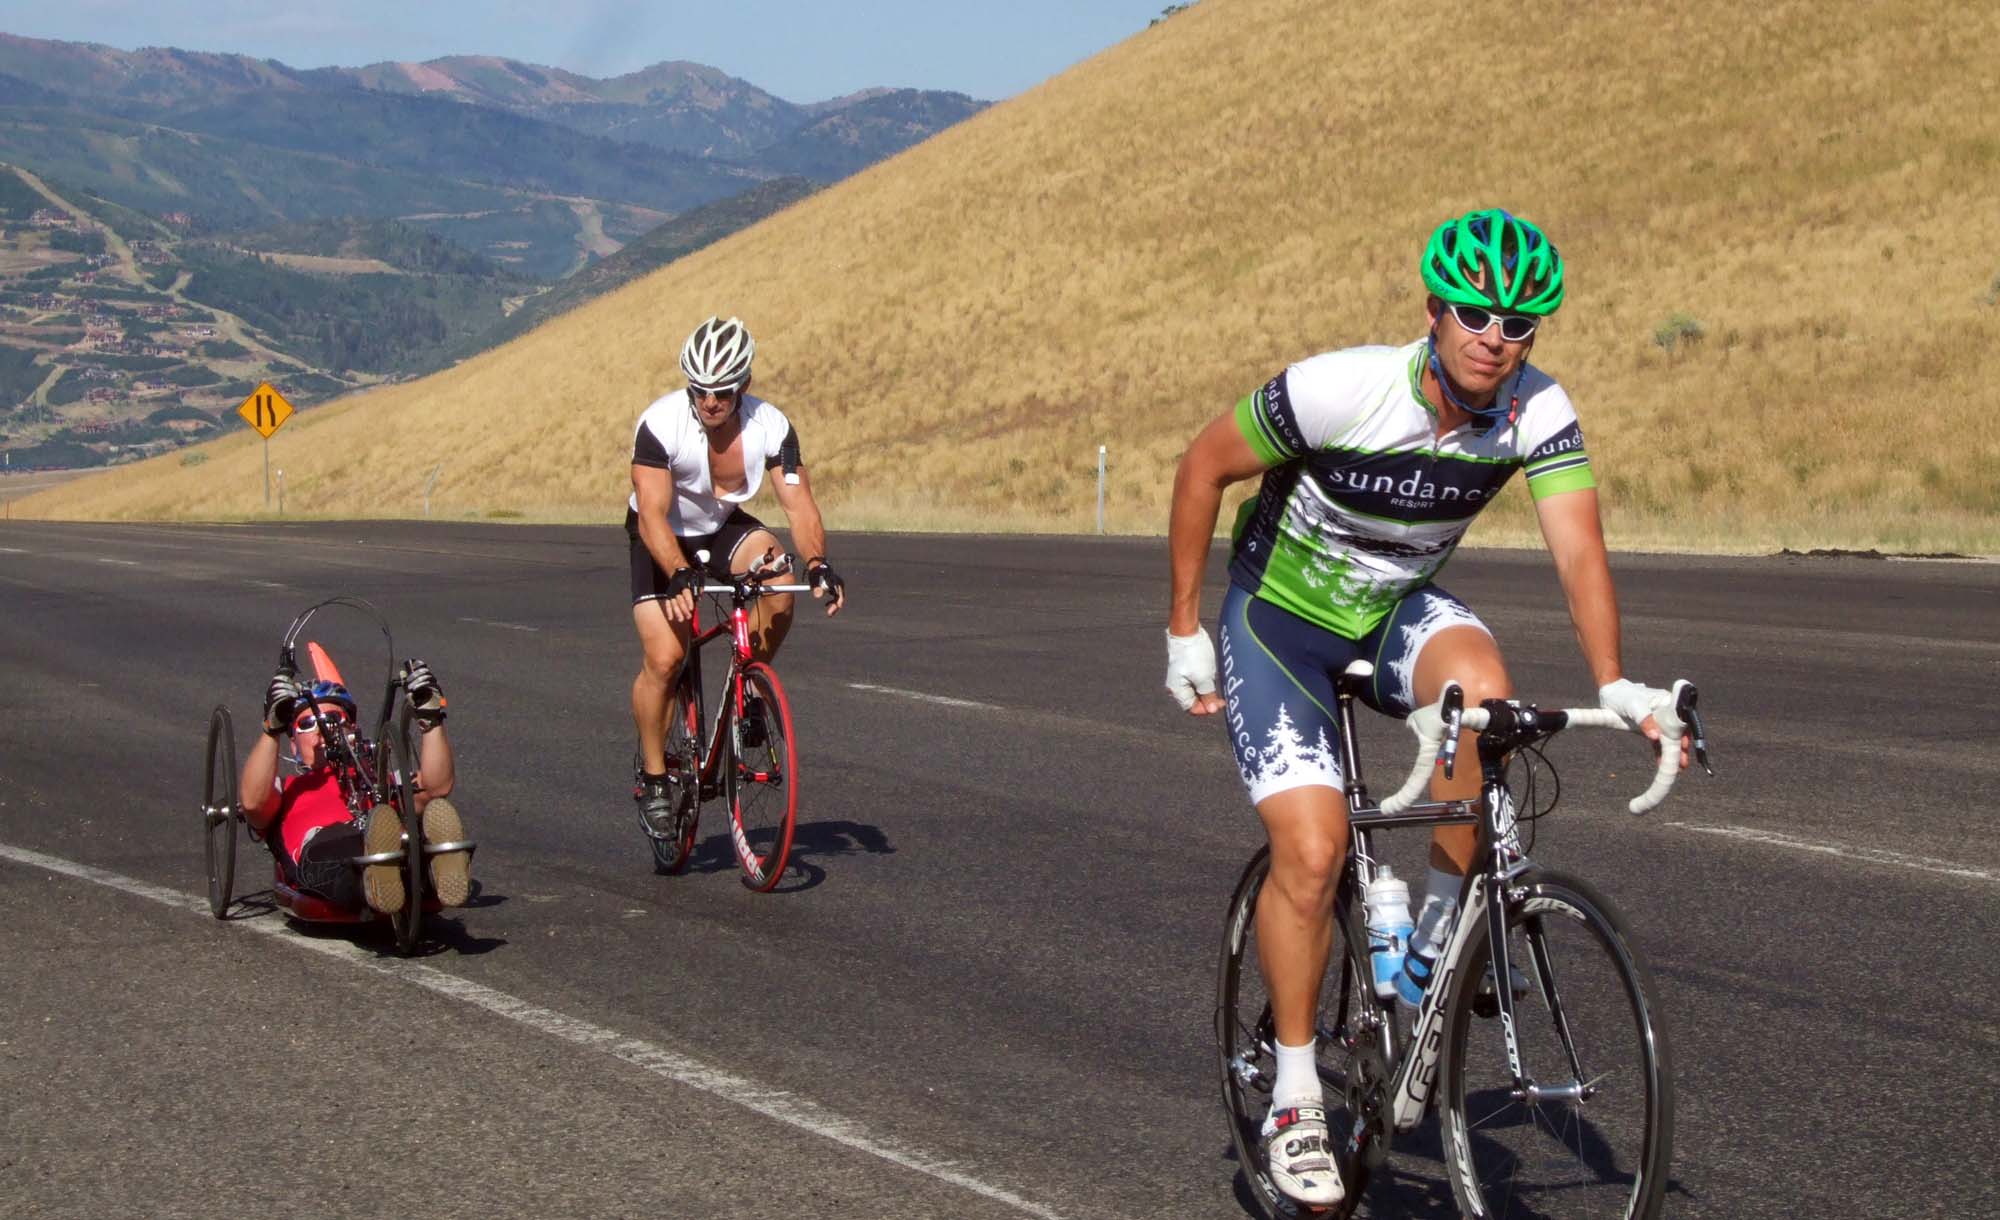 Summit Challenge Century 2012 to be Held in Park City this Saturday – August 25